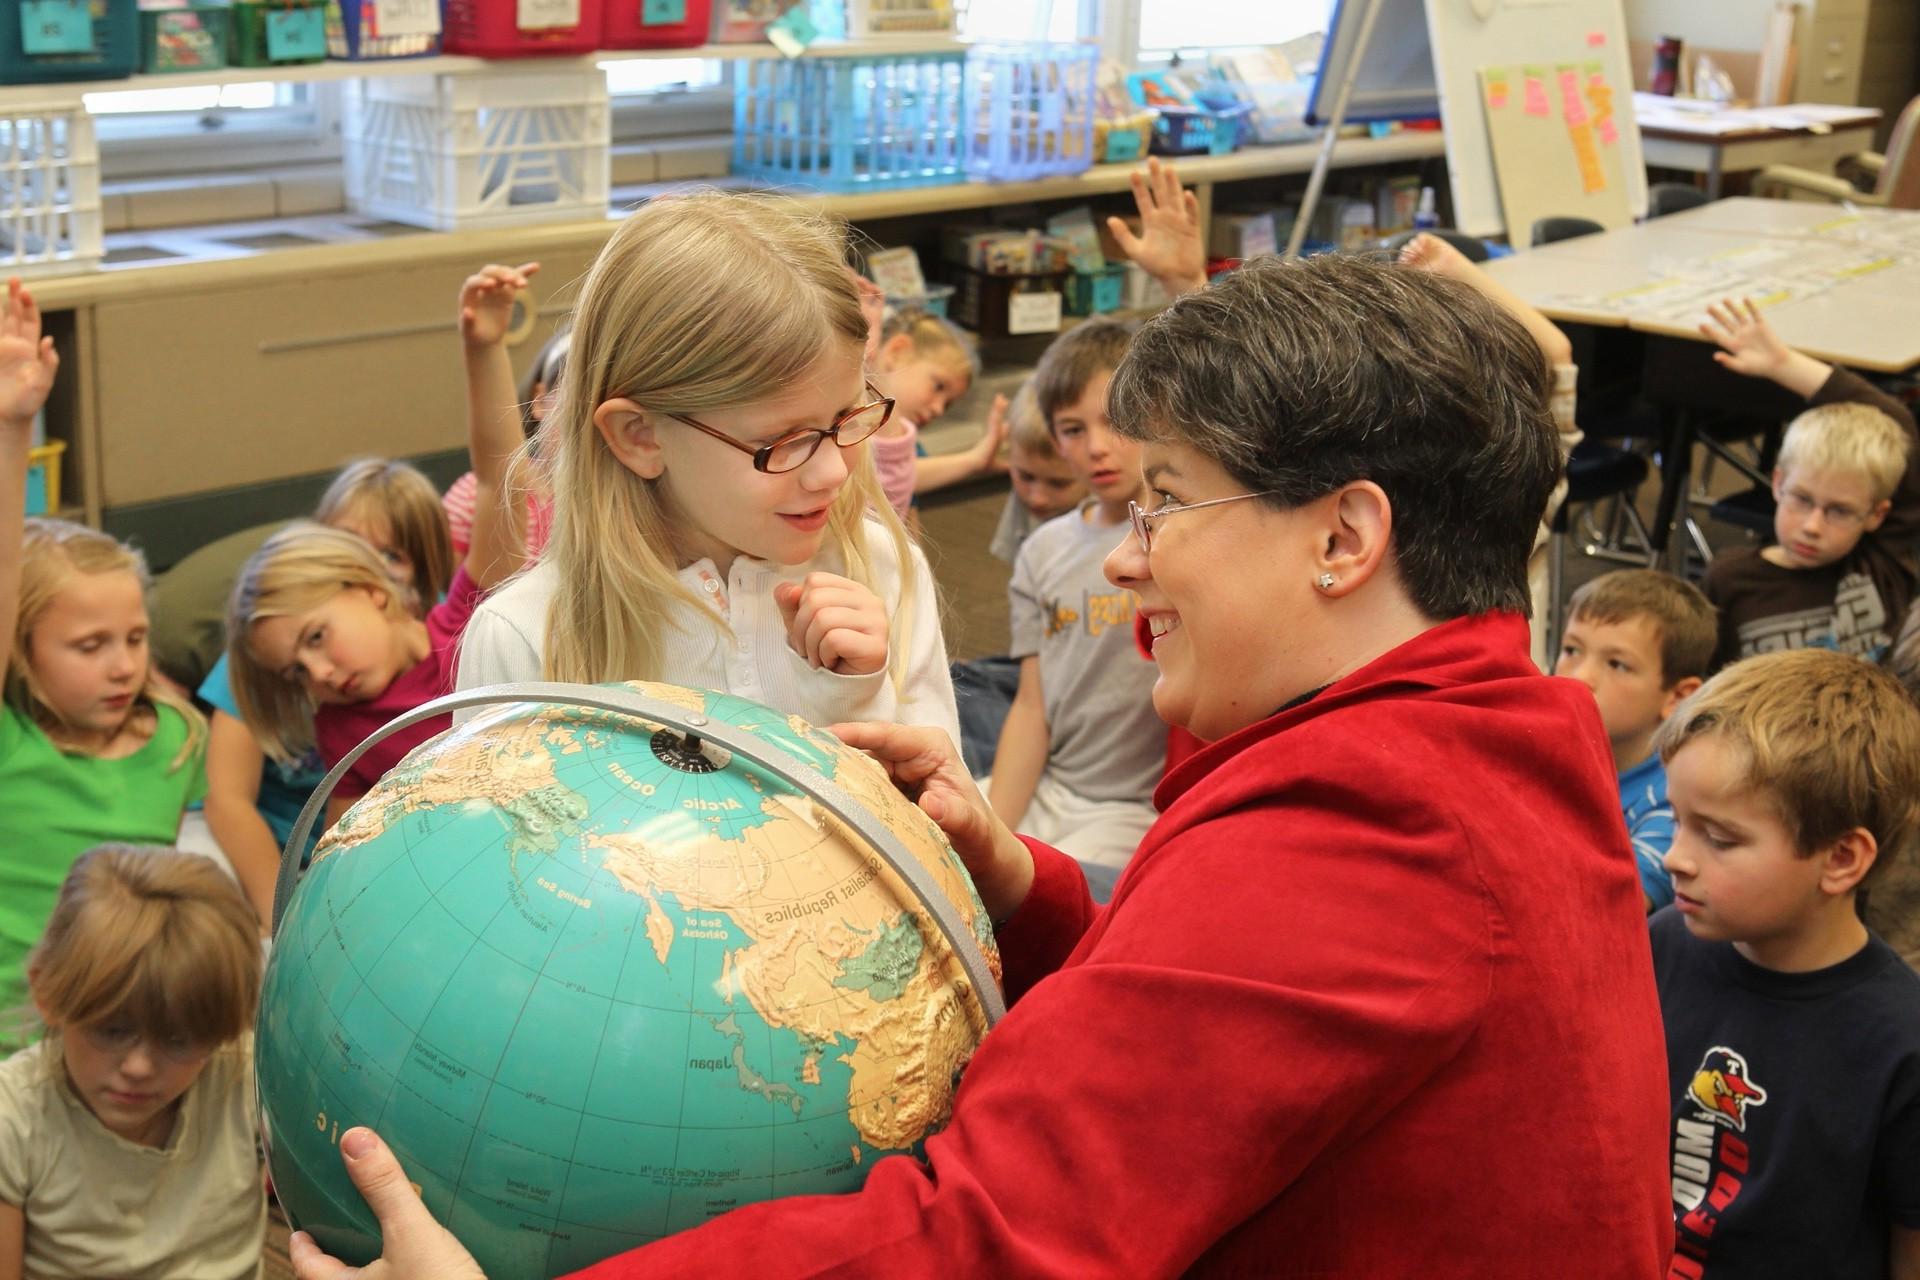 A female 世界语言教师 points out a country on a globe to a little girl as the rest of the class sits on the floor around them.